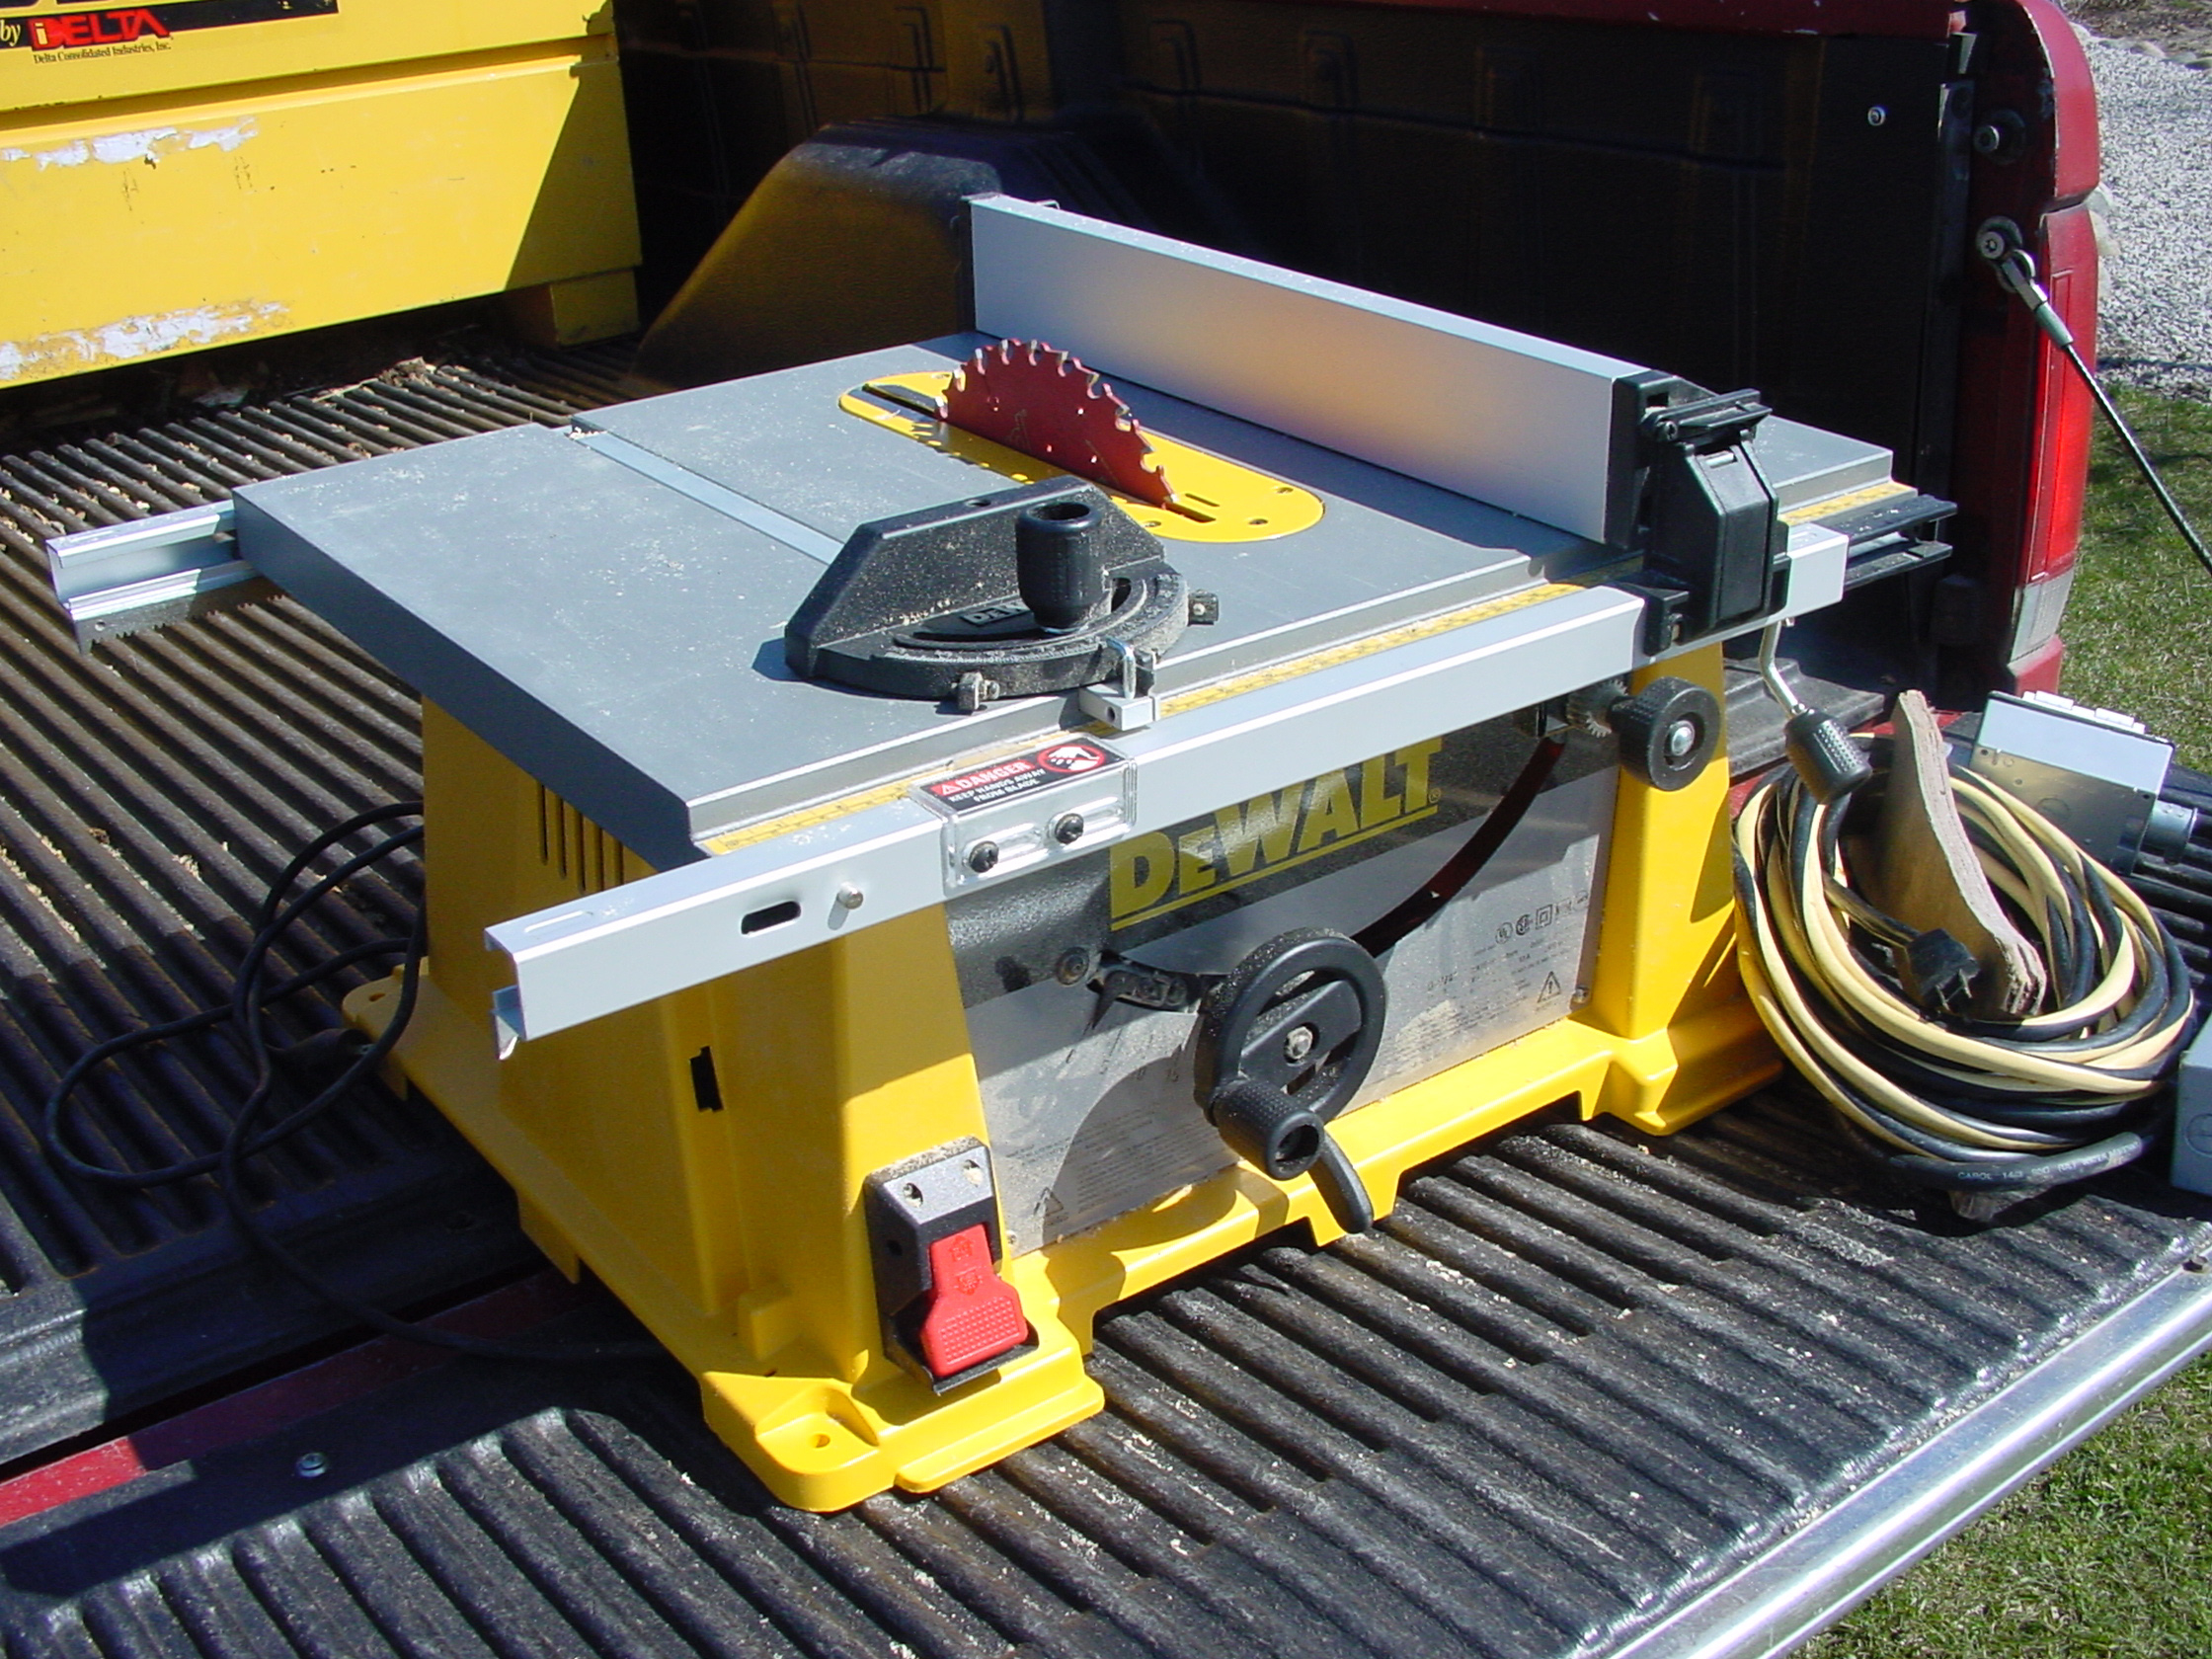 do you really need a table saw? 2